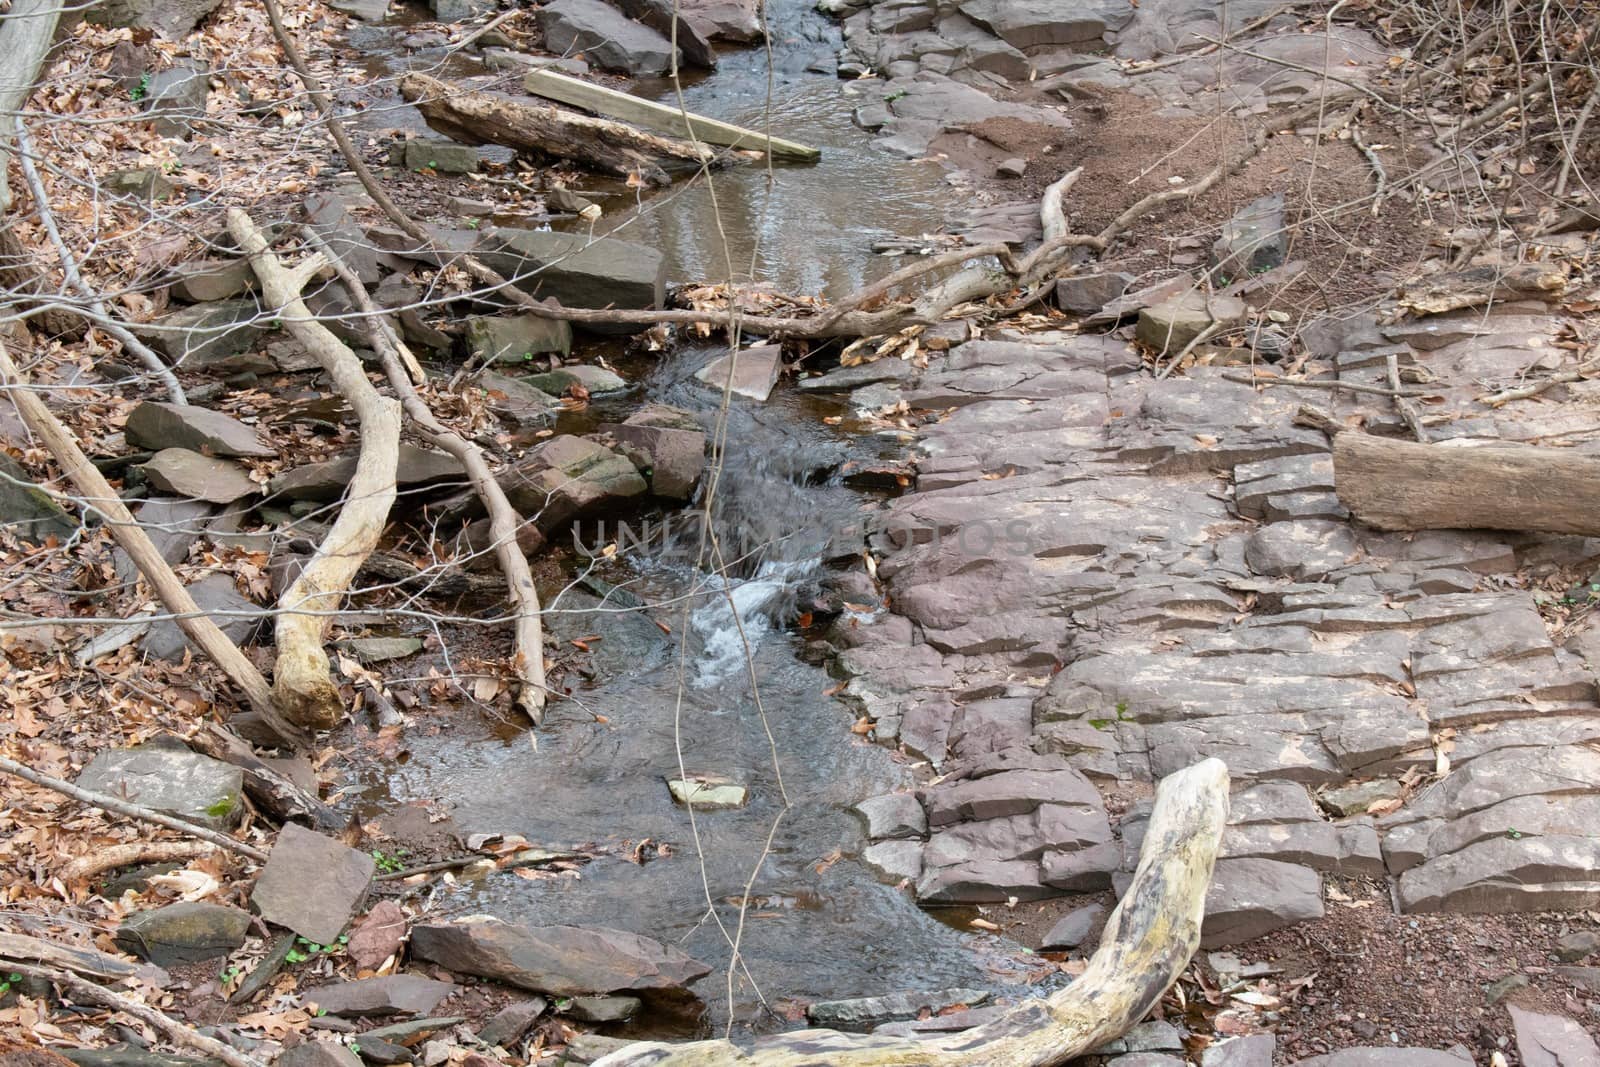 A Small and Shallow Creek Running Through Rocks and Dead Foliage in Winter